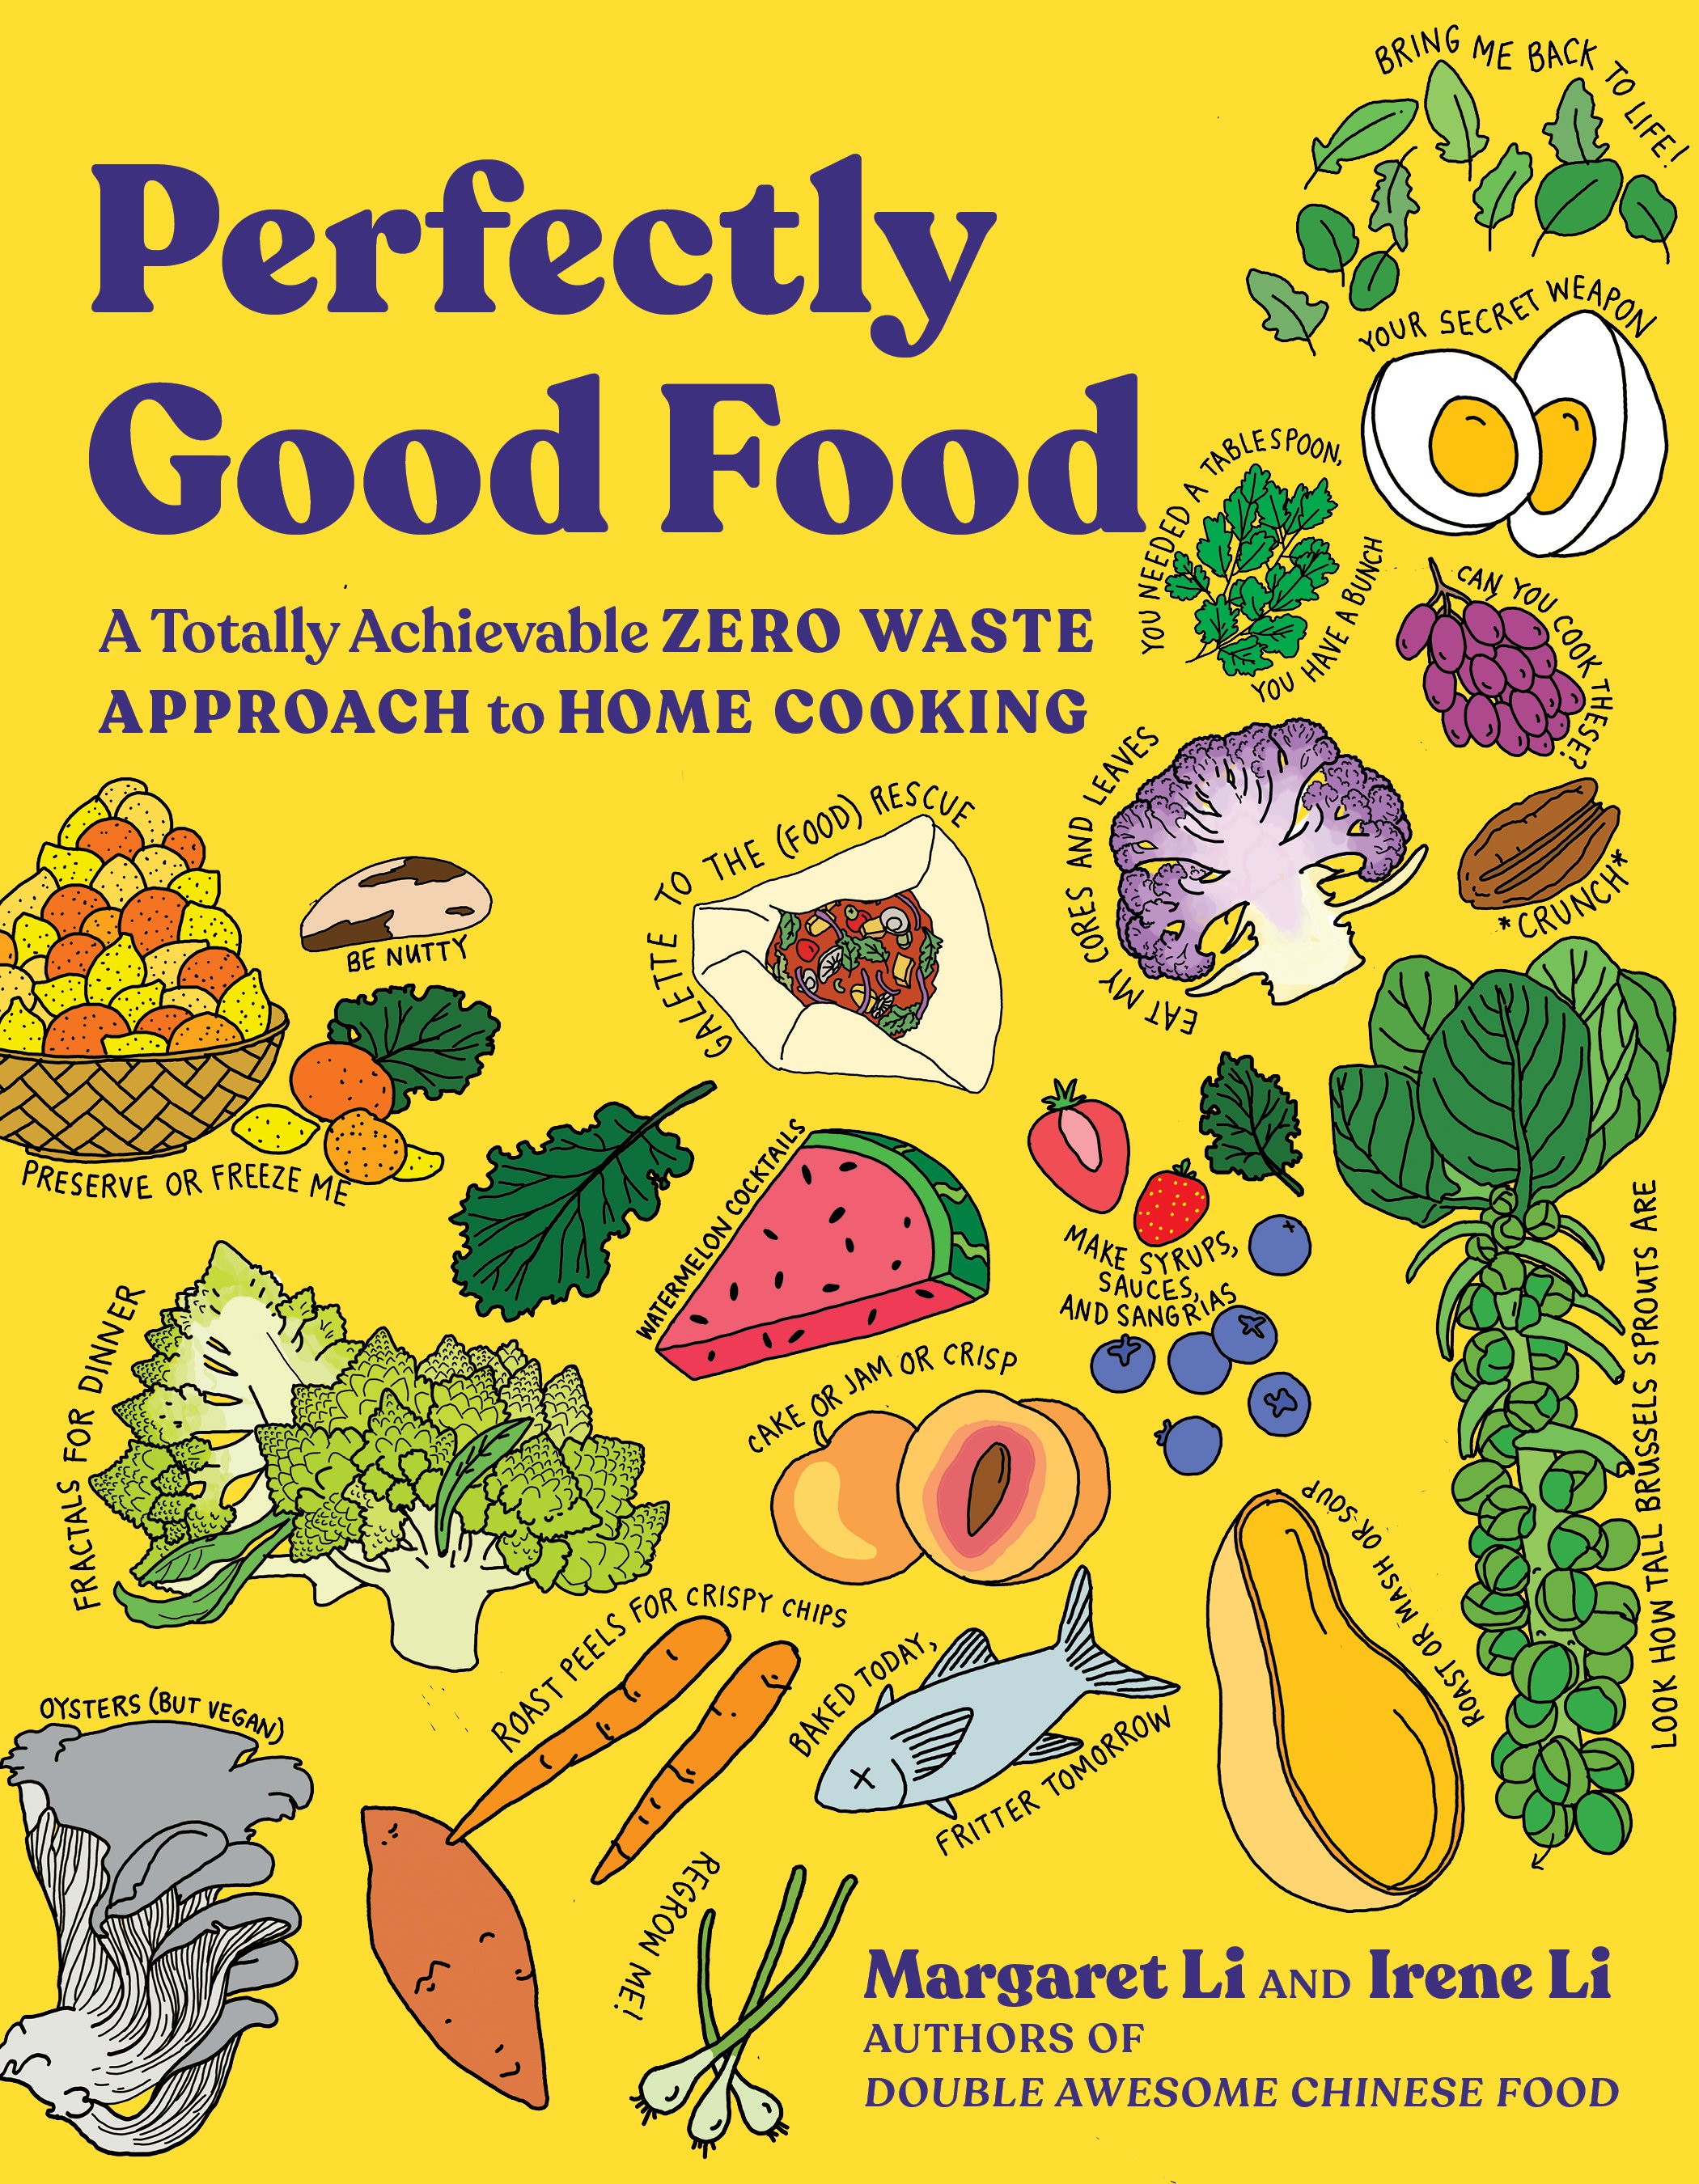 Our Cookbook - Perfectly Good Food: A Totally Achievable Zero